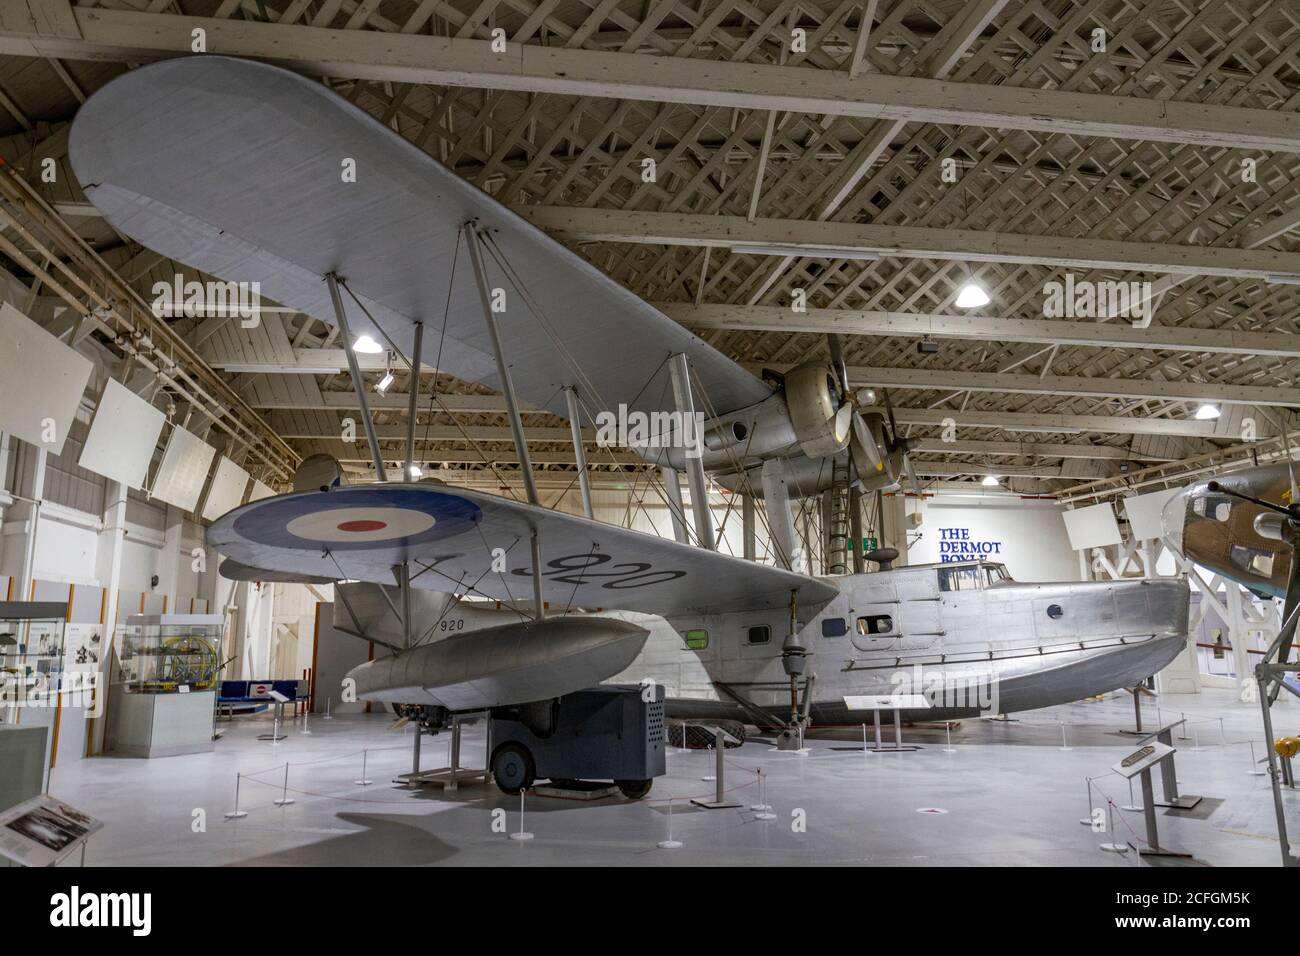 A Supermarine Stranraer general reconnaissance flying-boat (1935-42) on display in the RAF Museum, London, UK. Stock Photo